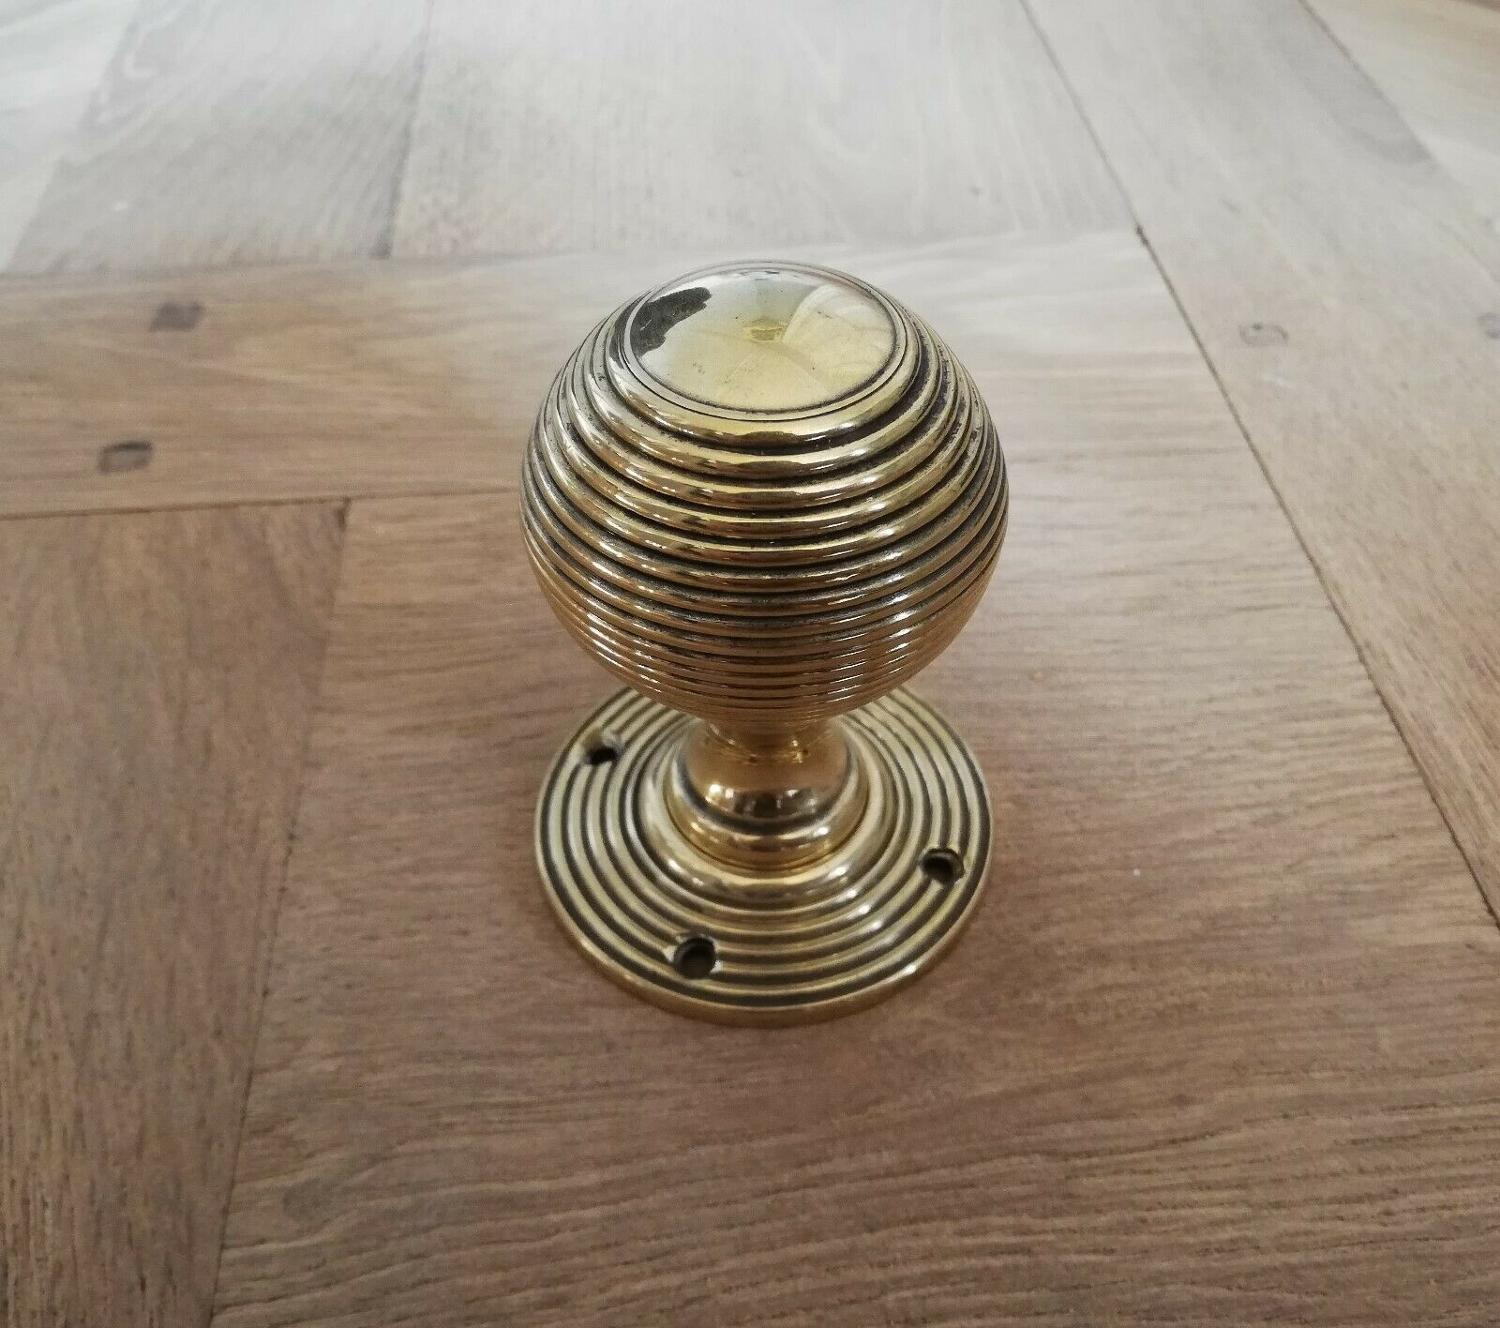 M1249 A PAIR OF MODERN BRASS BEEHIVE STYLE DOOR KNOBS